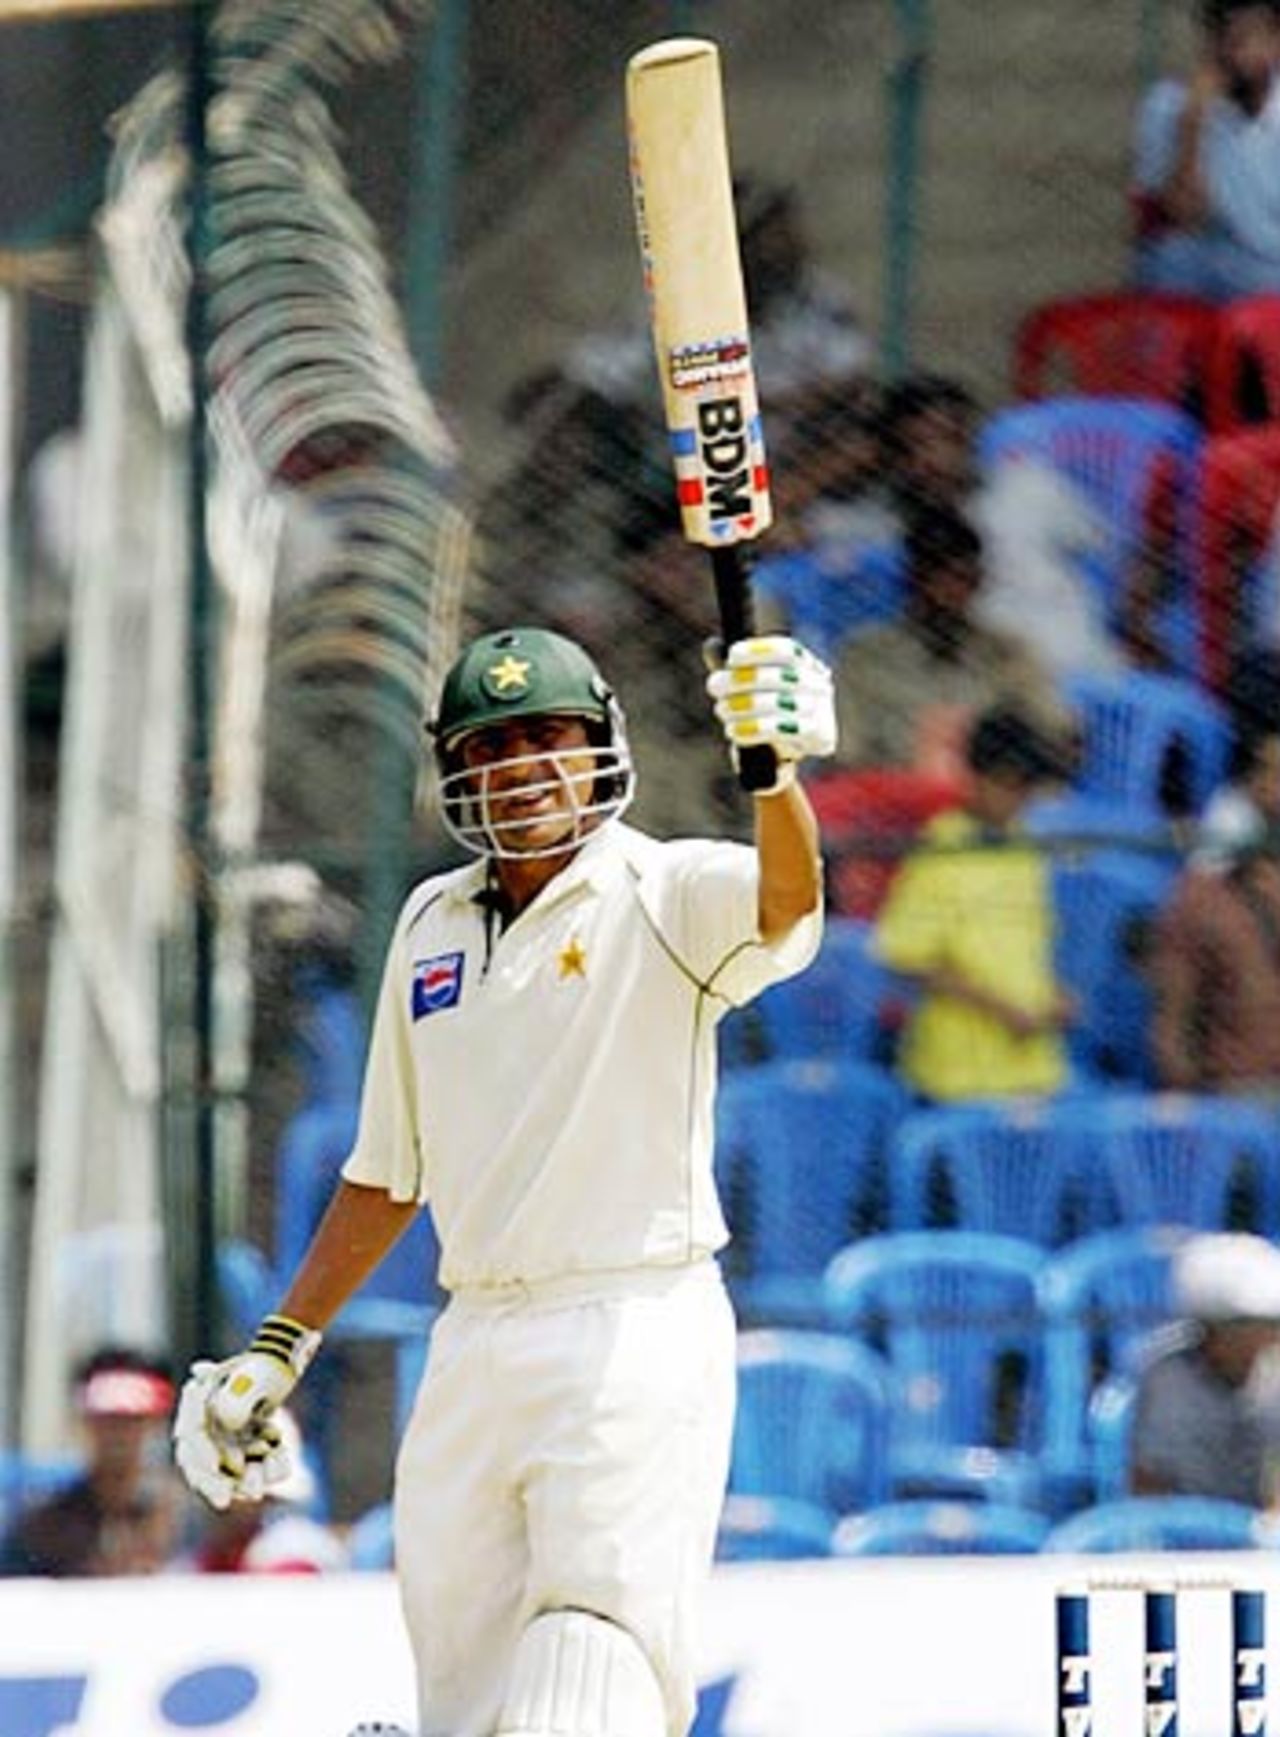 The spinners and fast bowlers were treated with equal content by Younis Khan as he reached the 150-mark, India v Pakistan, 3rd Test, Bangalore, 1st day, March 24, 2005